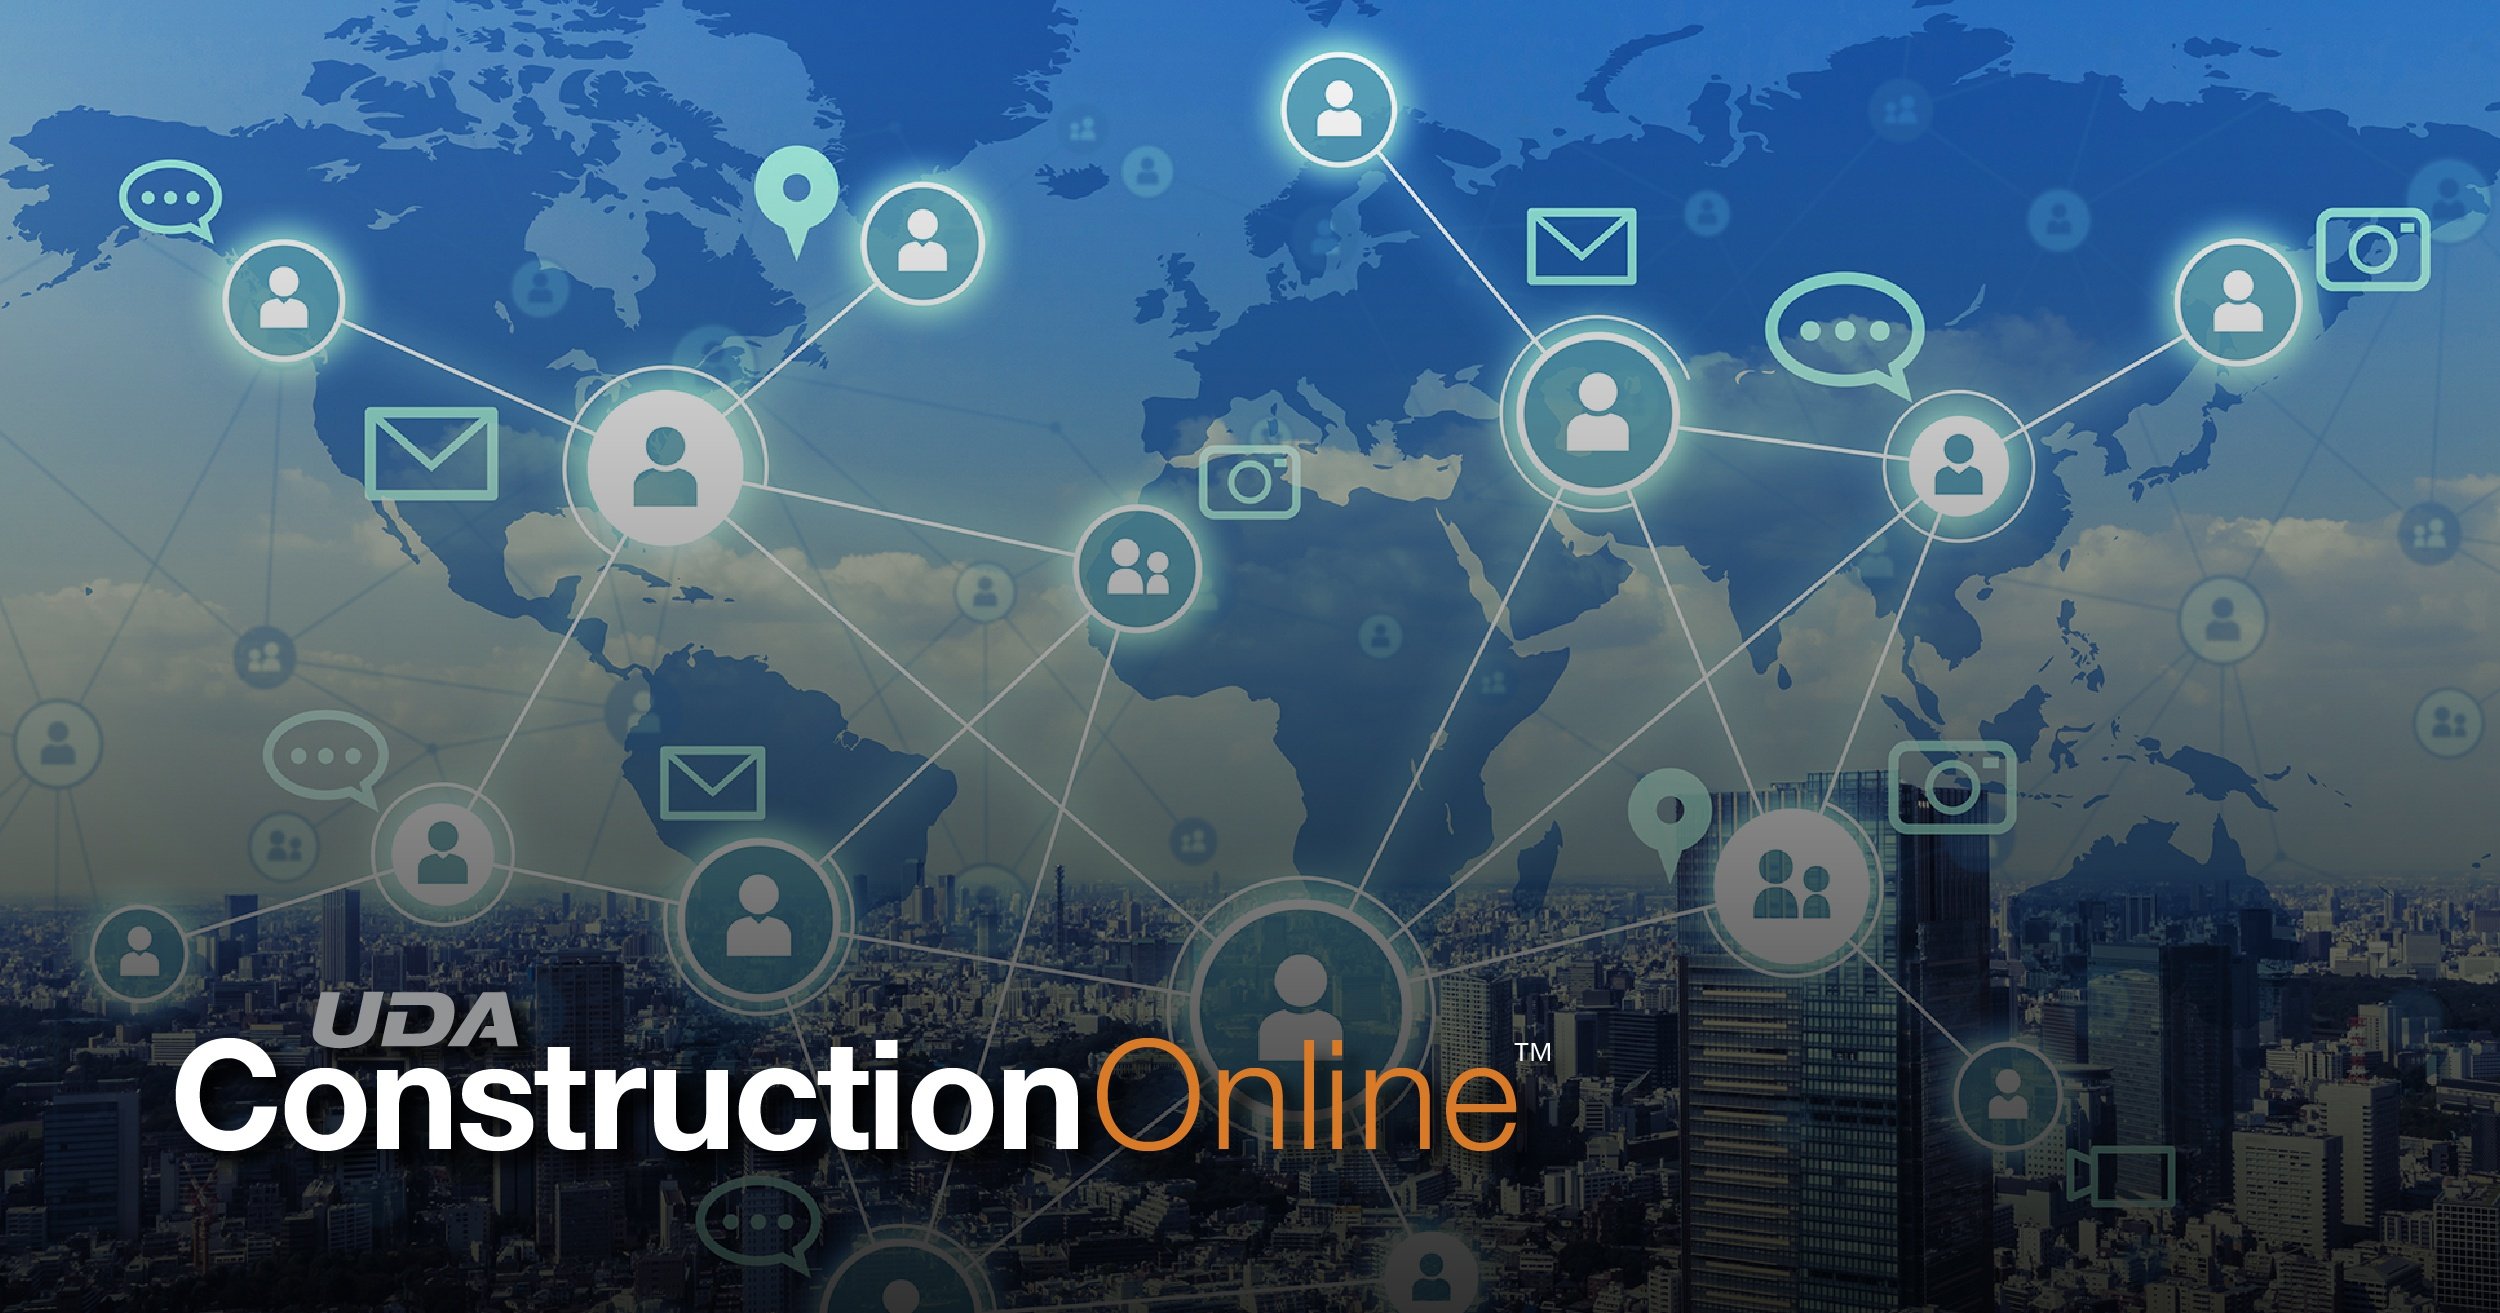 ConstructionOnline Grows to Serve Over 500,000 Industry Professionals